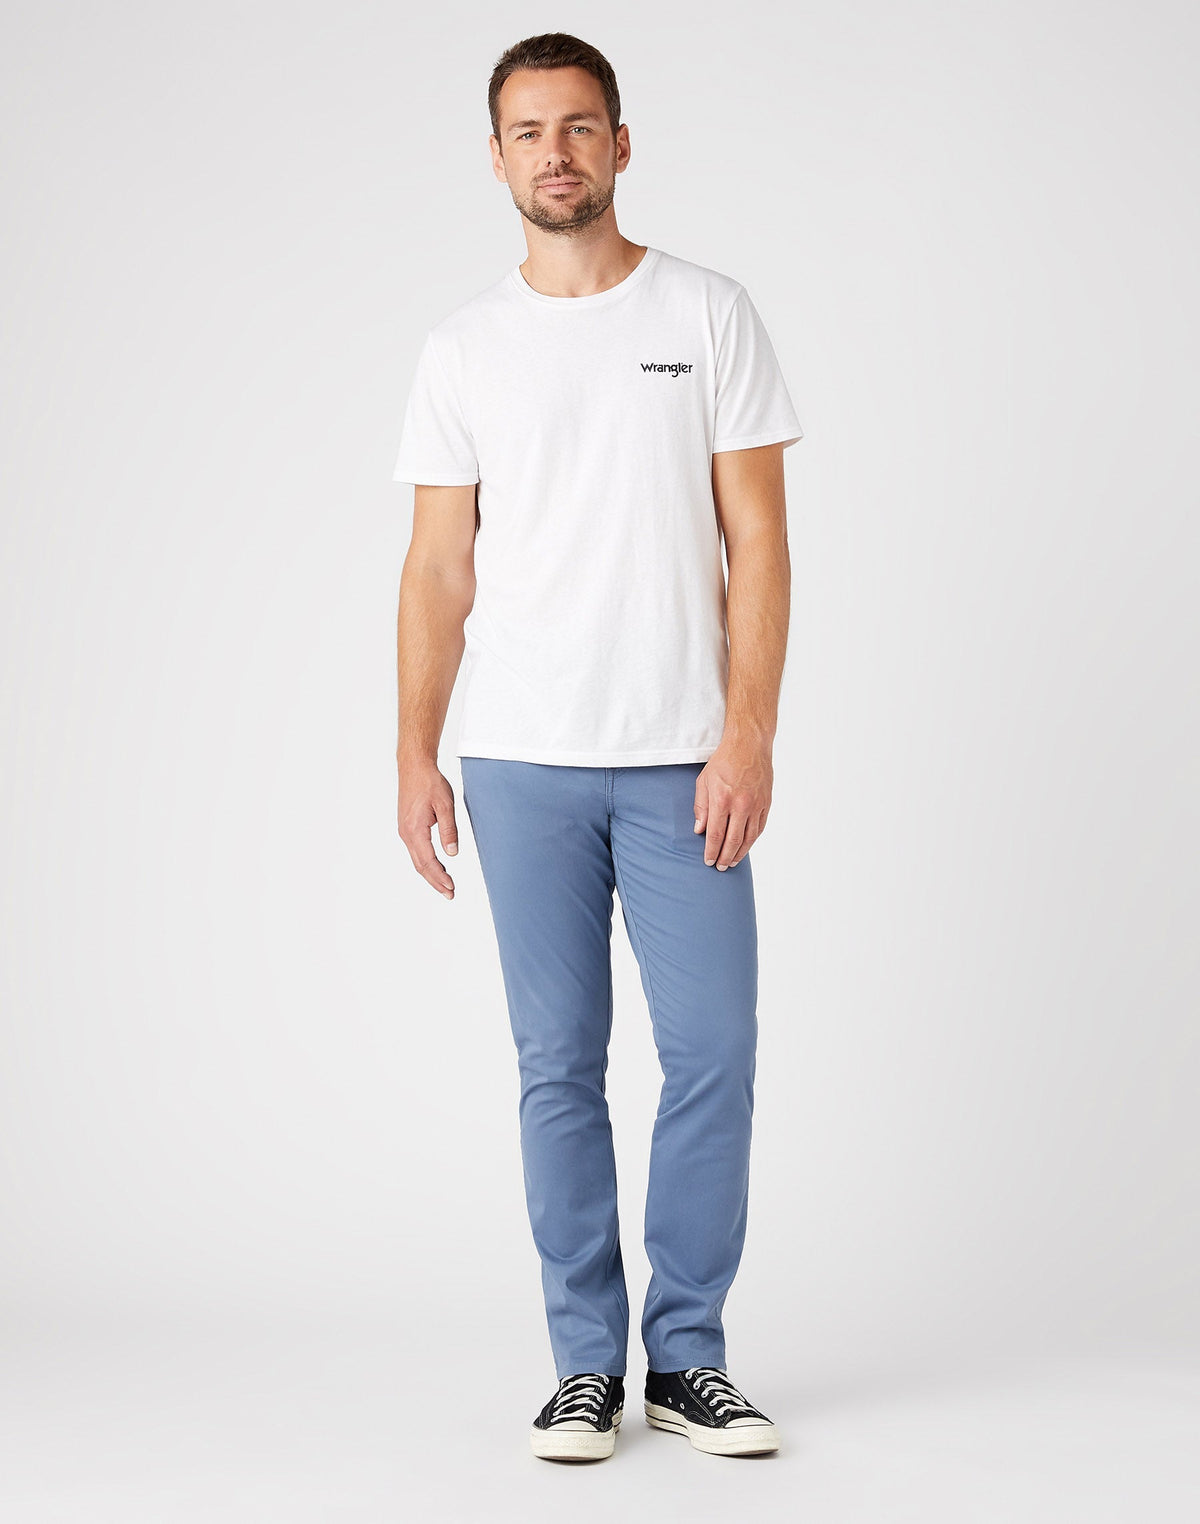 Texas Slim Trousers in Blue Mirage